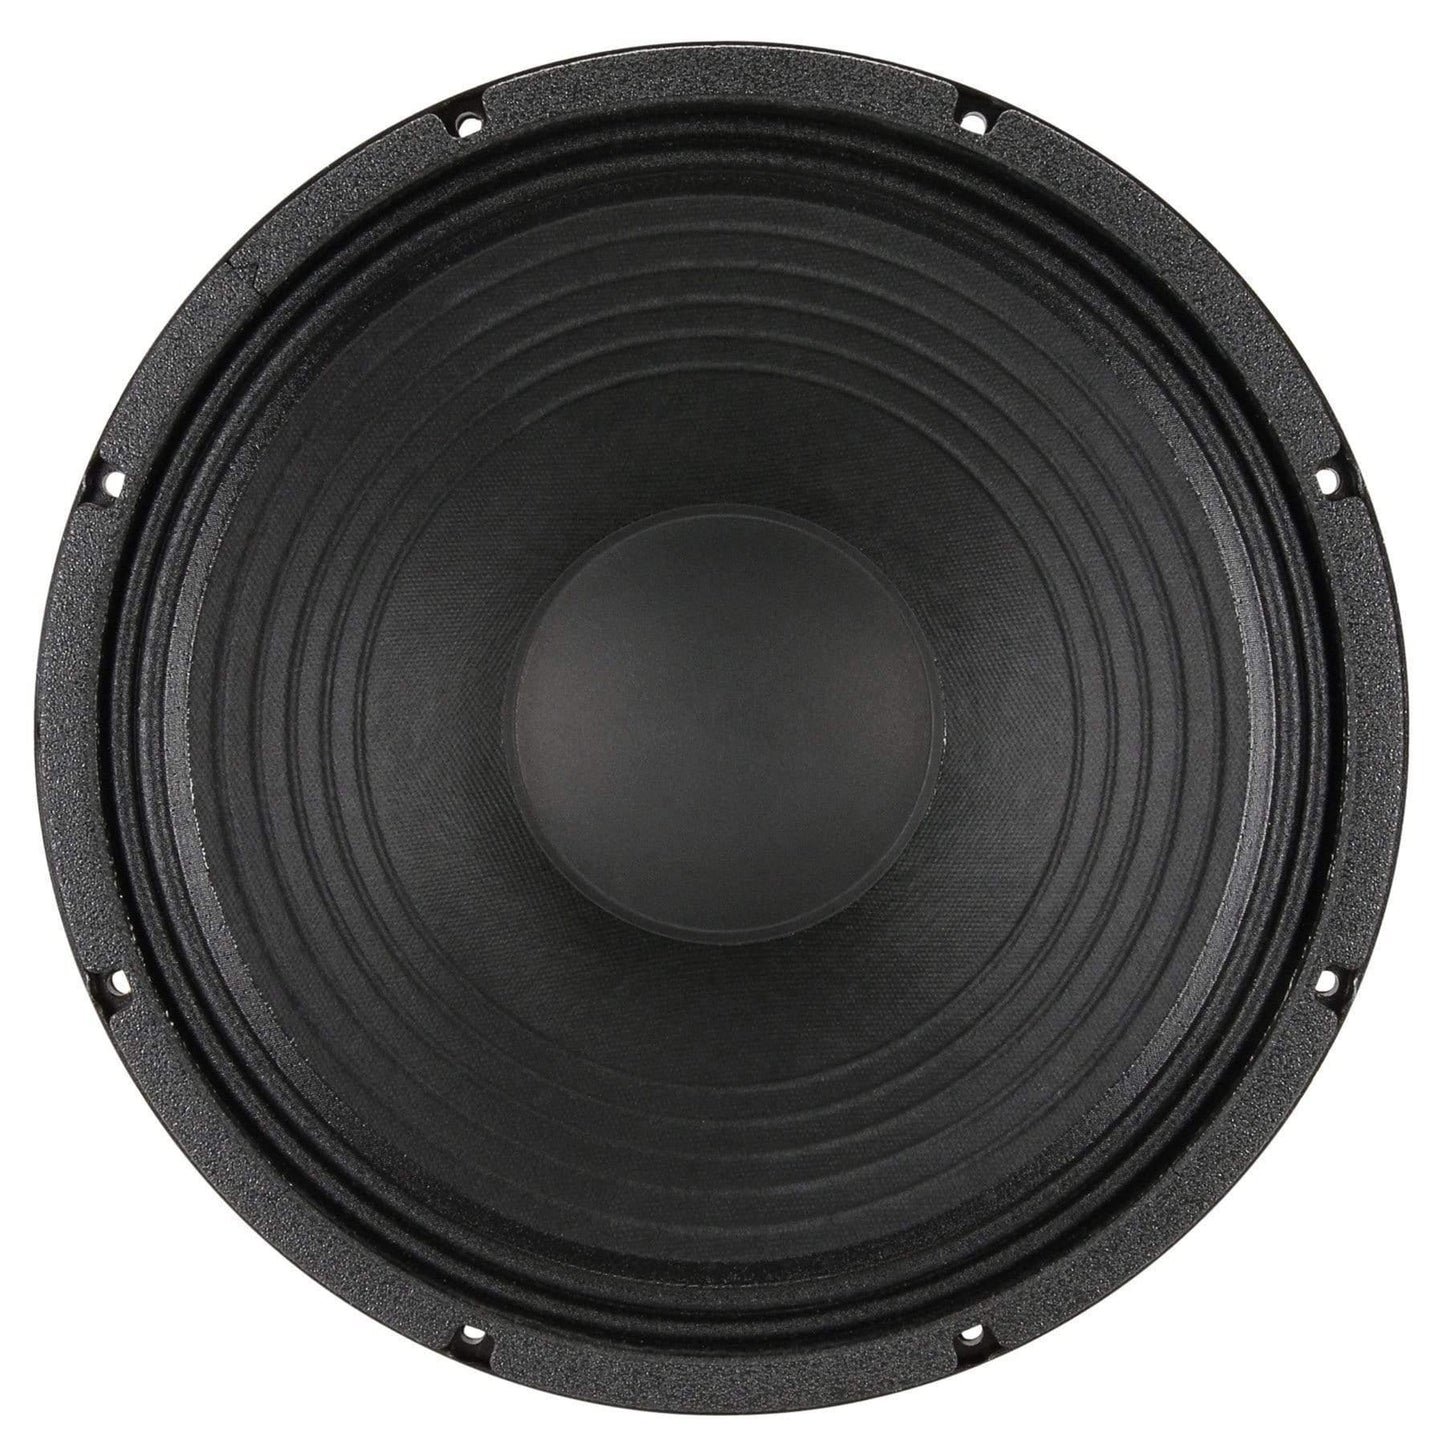 Eminence Omega Pro-15A 15 Replacement Speaker